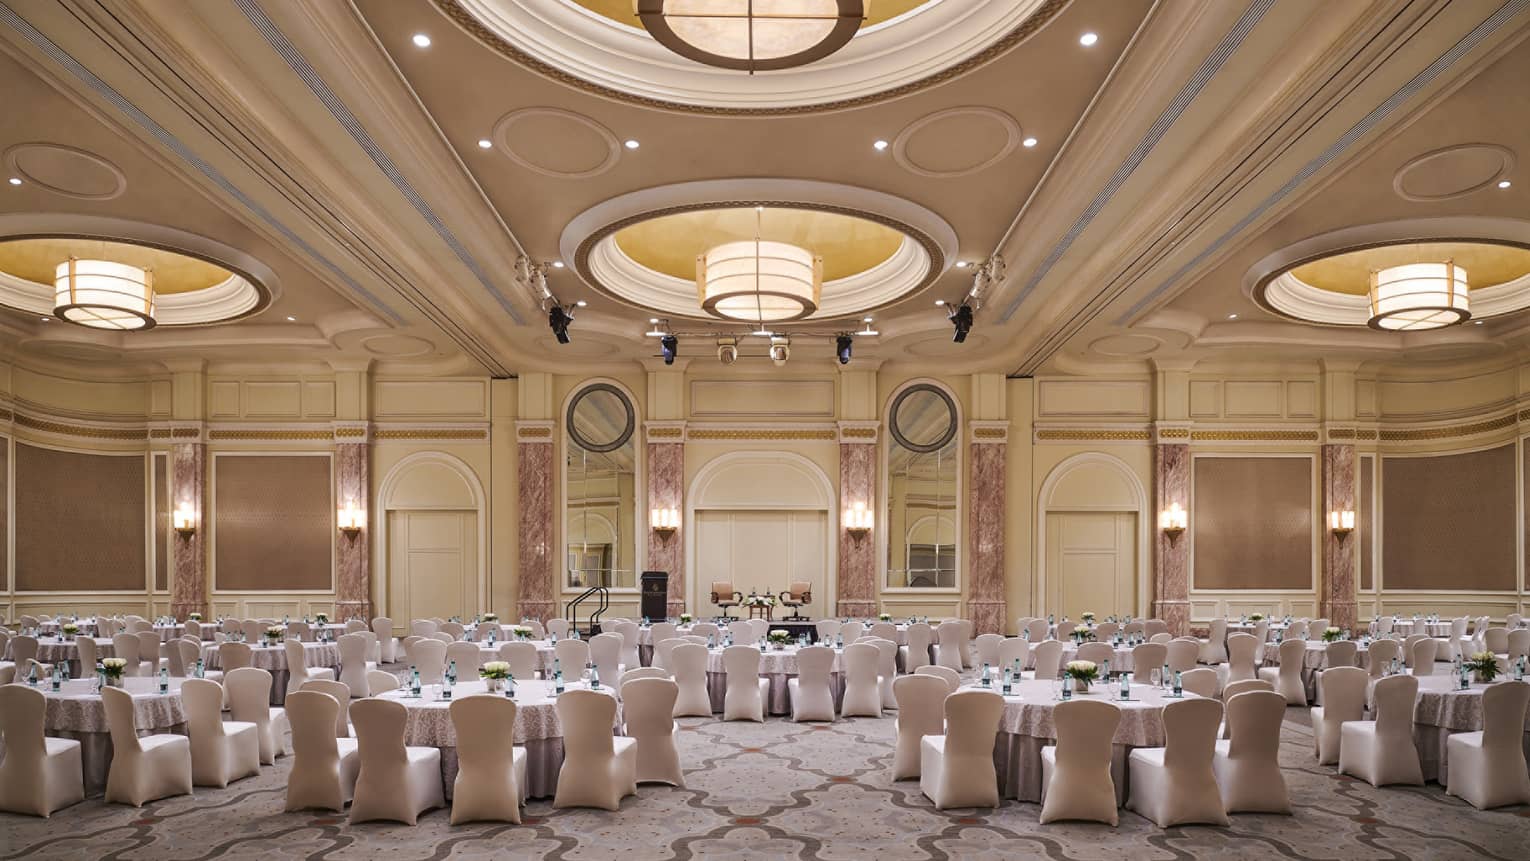 Round dining tables in large ballroom with recessed domes, large lights along high ceilings 